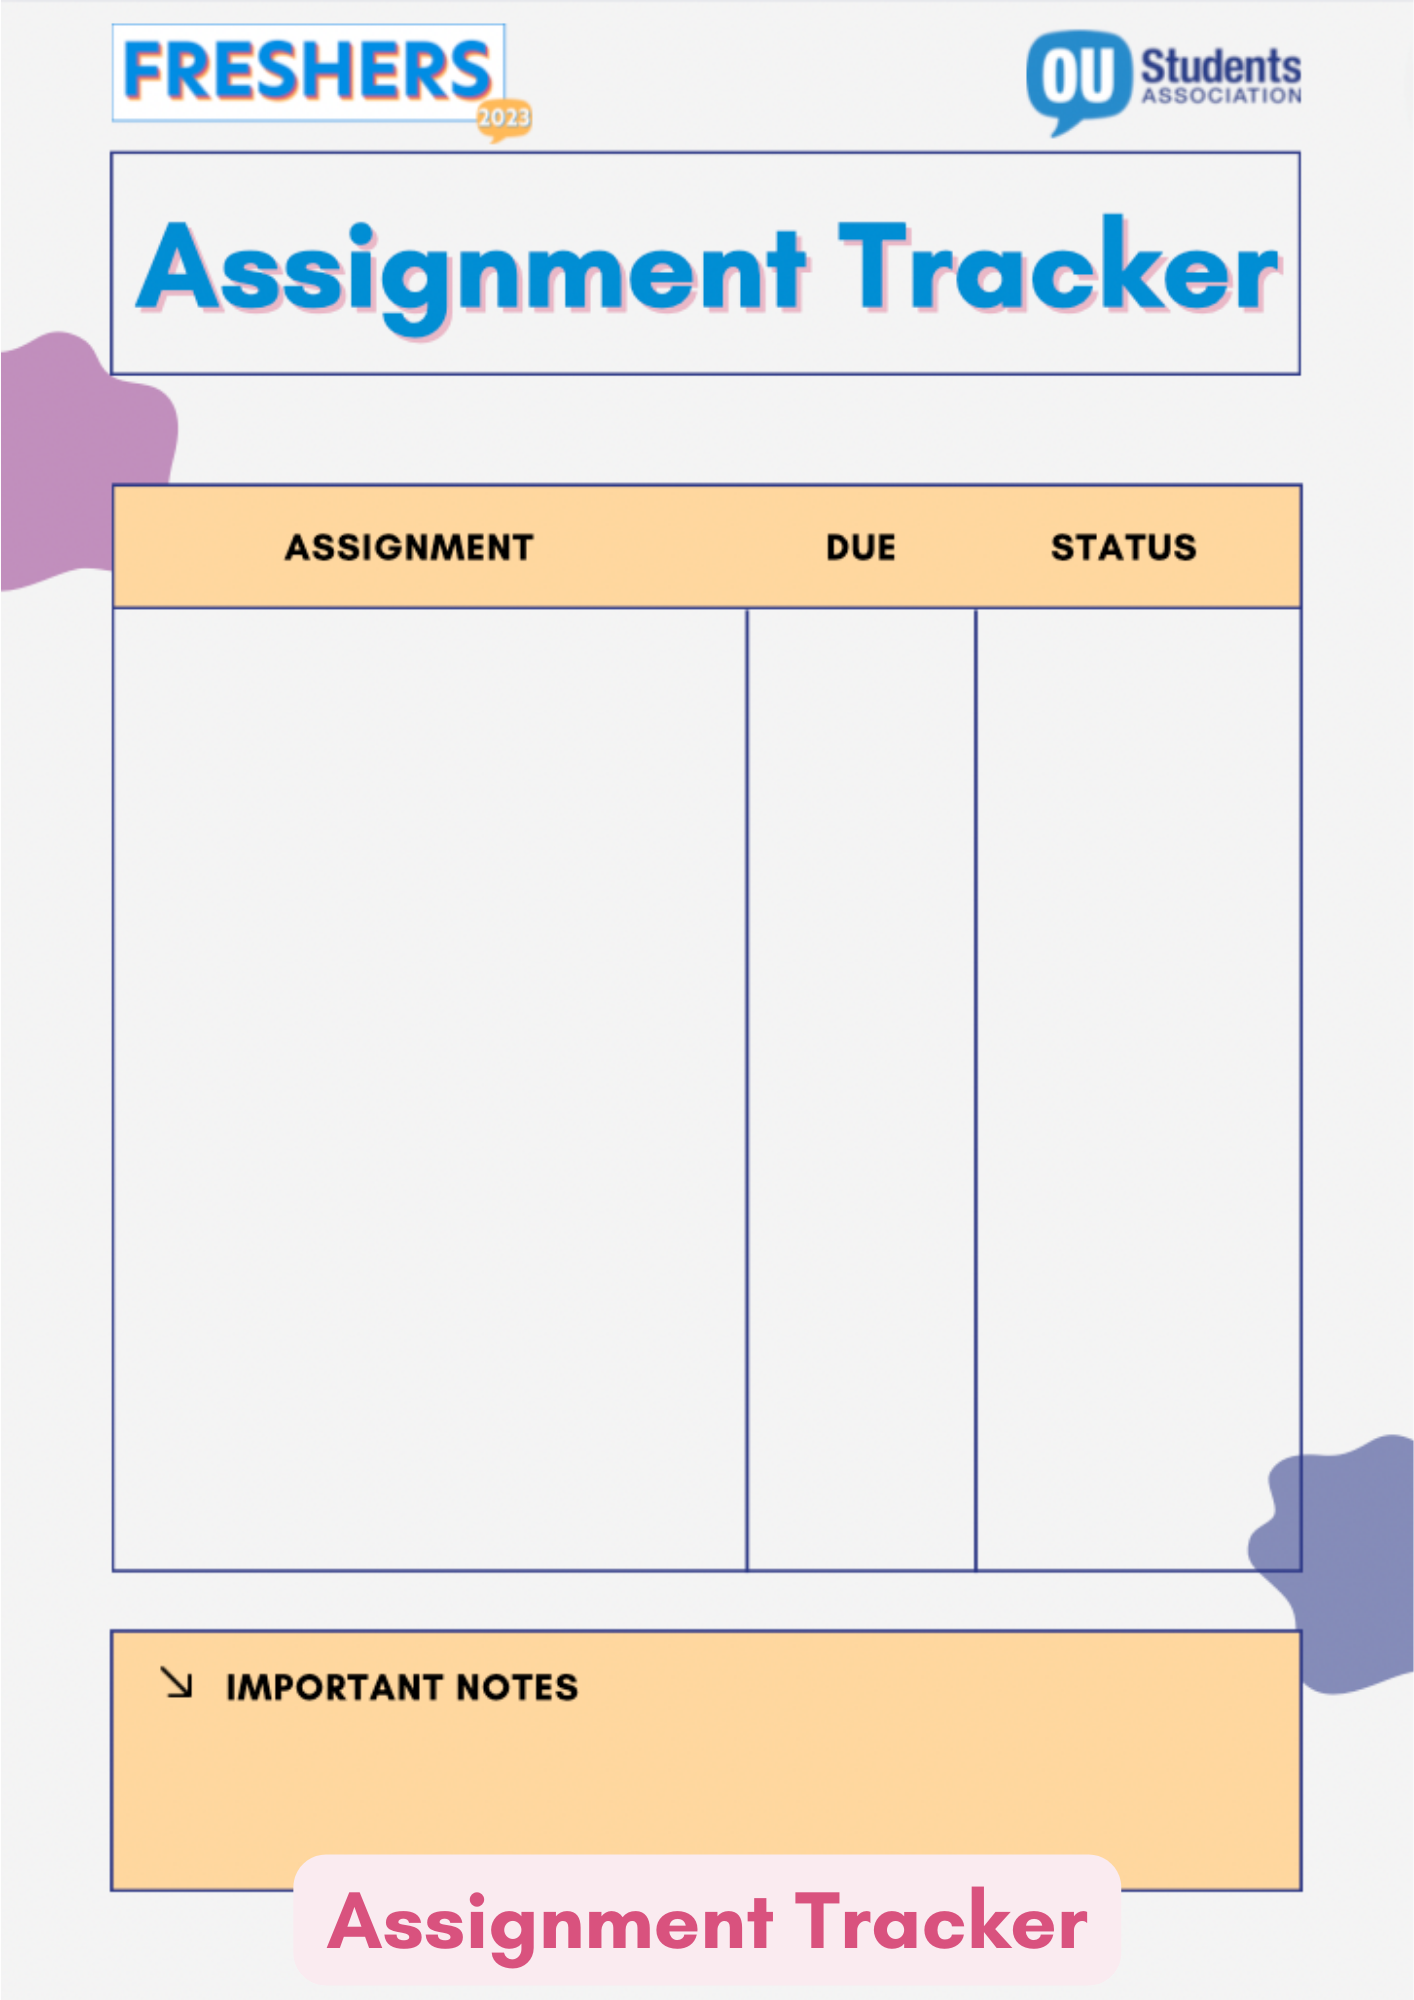 Image reads: Assignment Tracker. There is space on this document to write your assignment, due date and status as well as important notes.